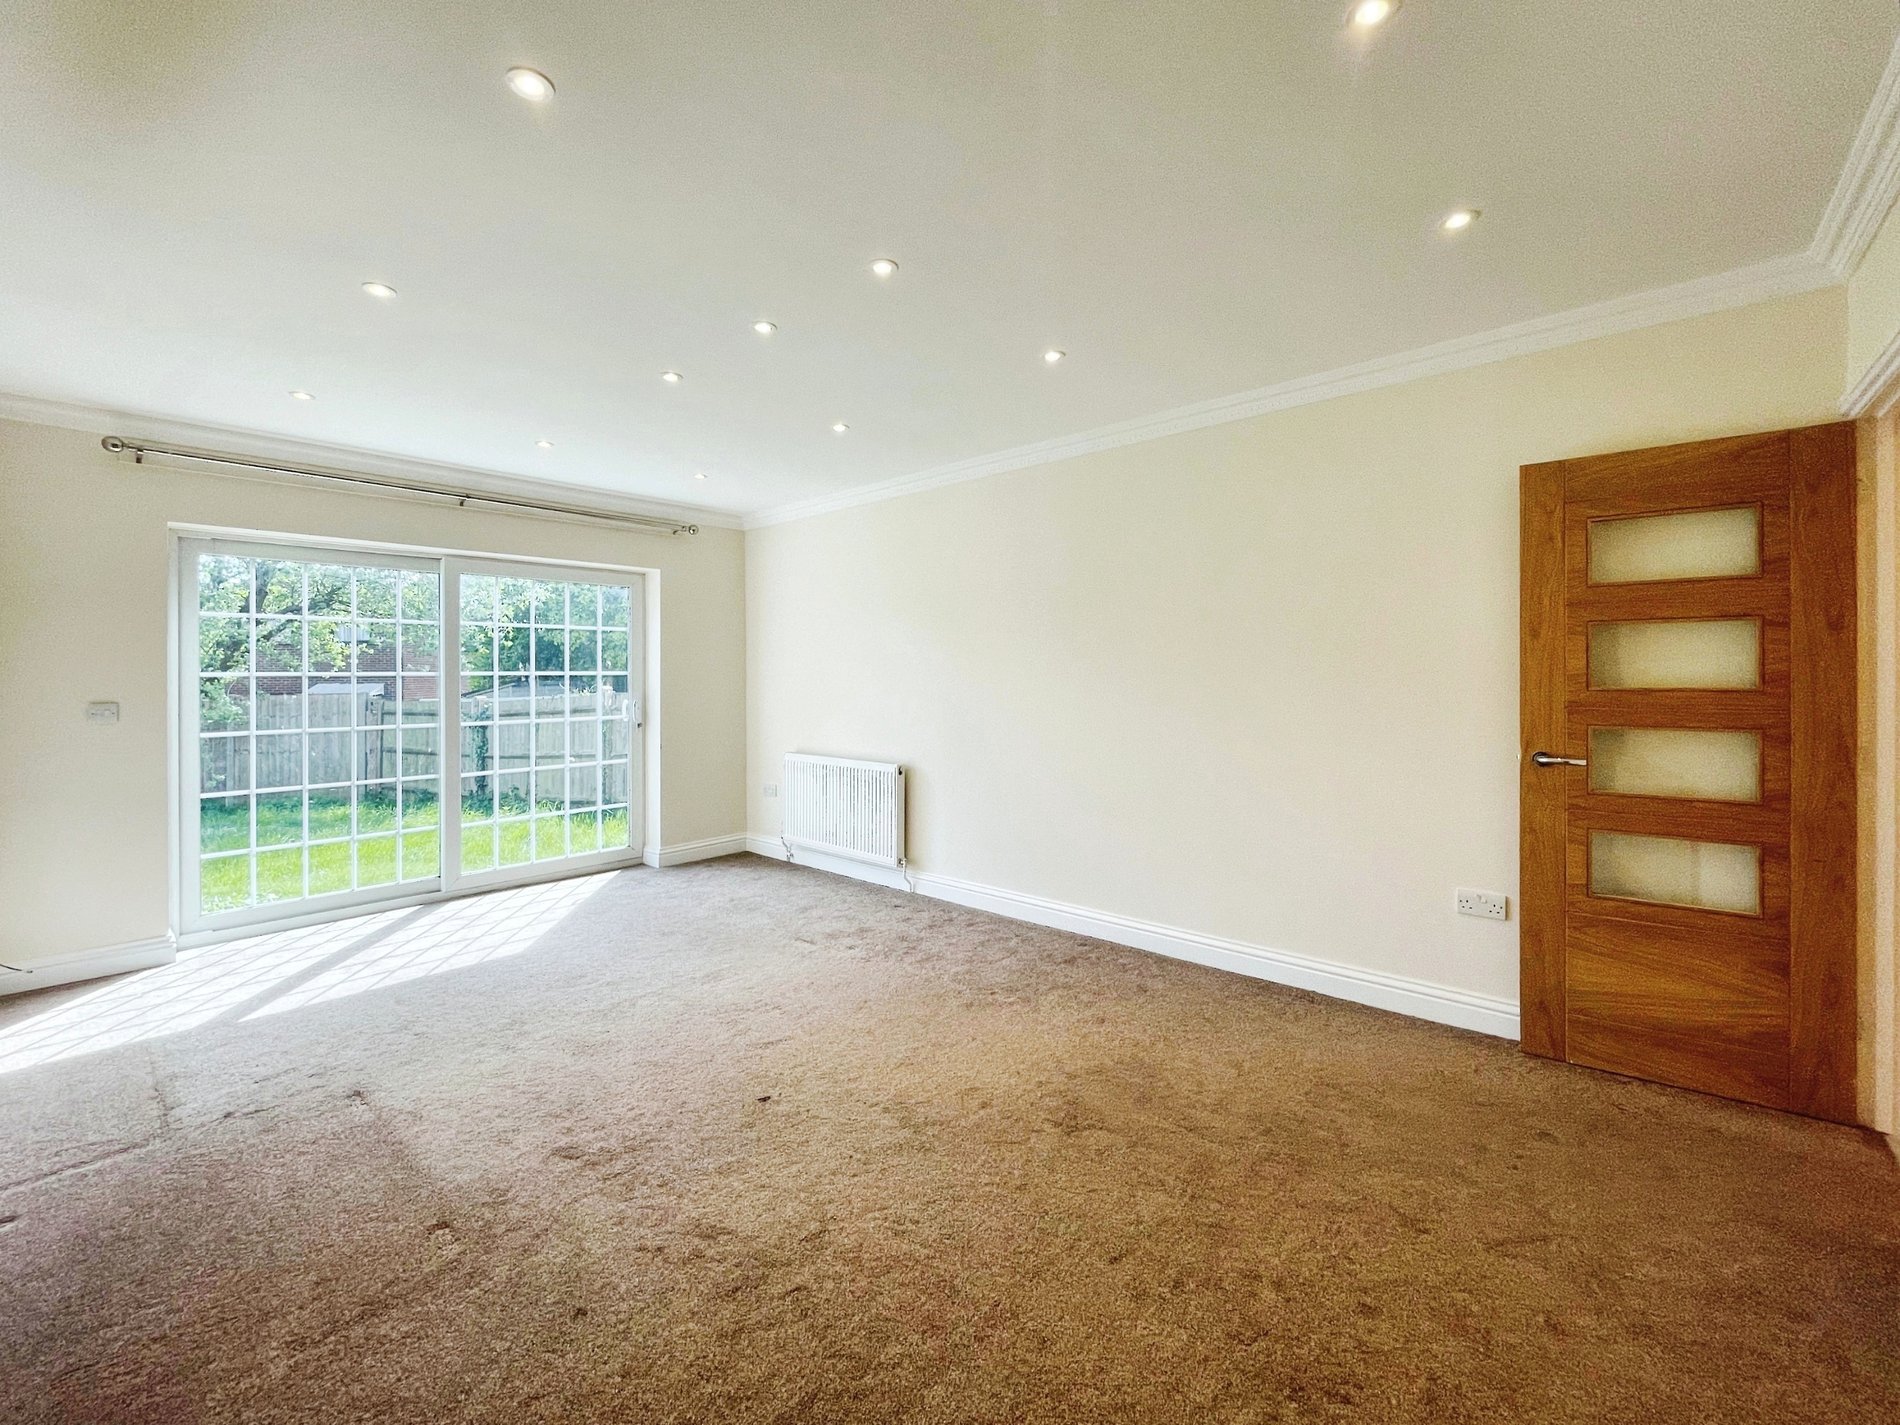 4 bed detached house to rent in Lent Rise Road, Burnham  - Property Image 2